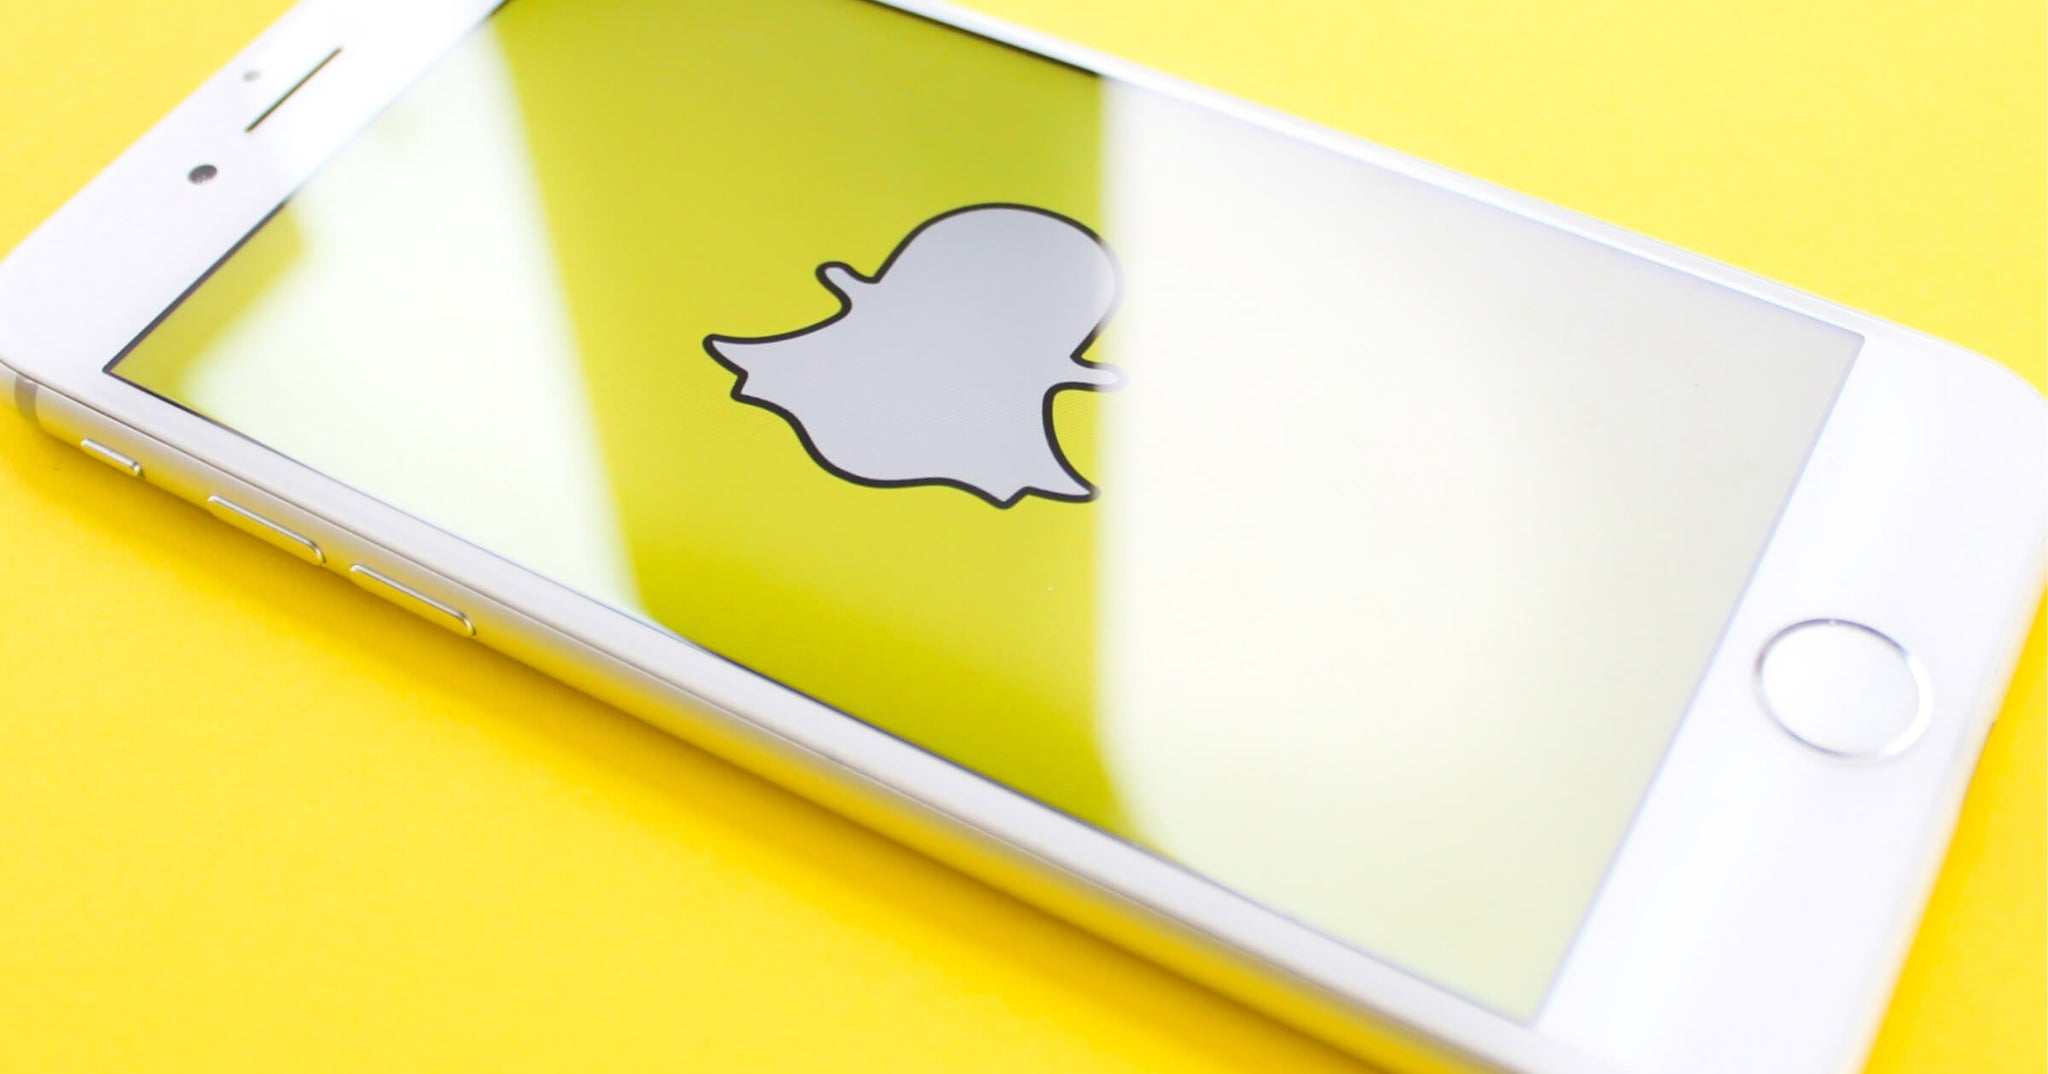 Is Snapchat dying? Our analysis to answer this important question